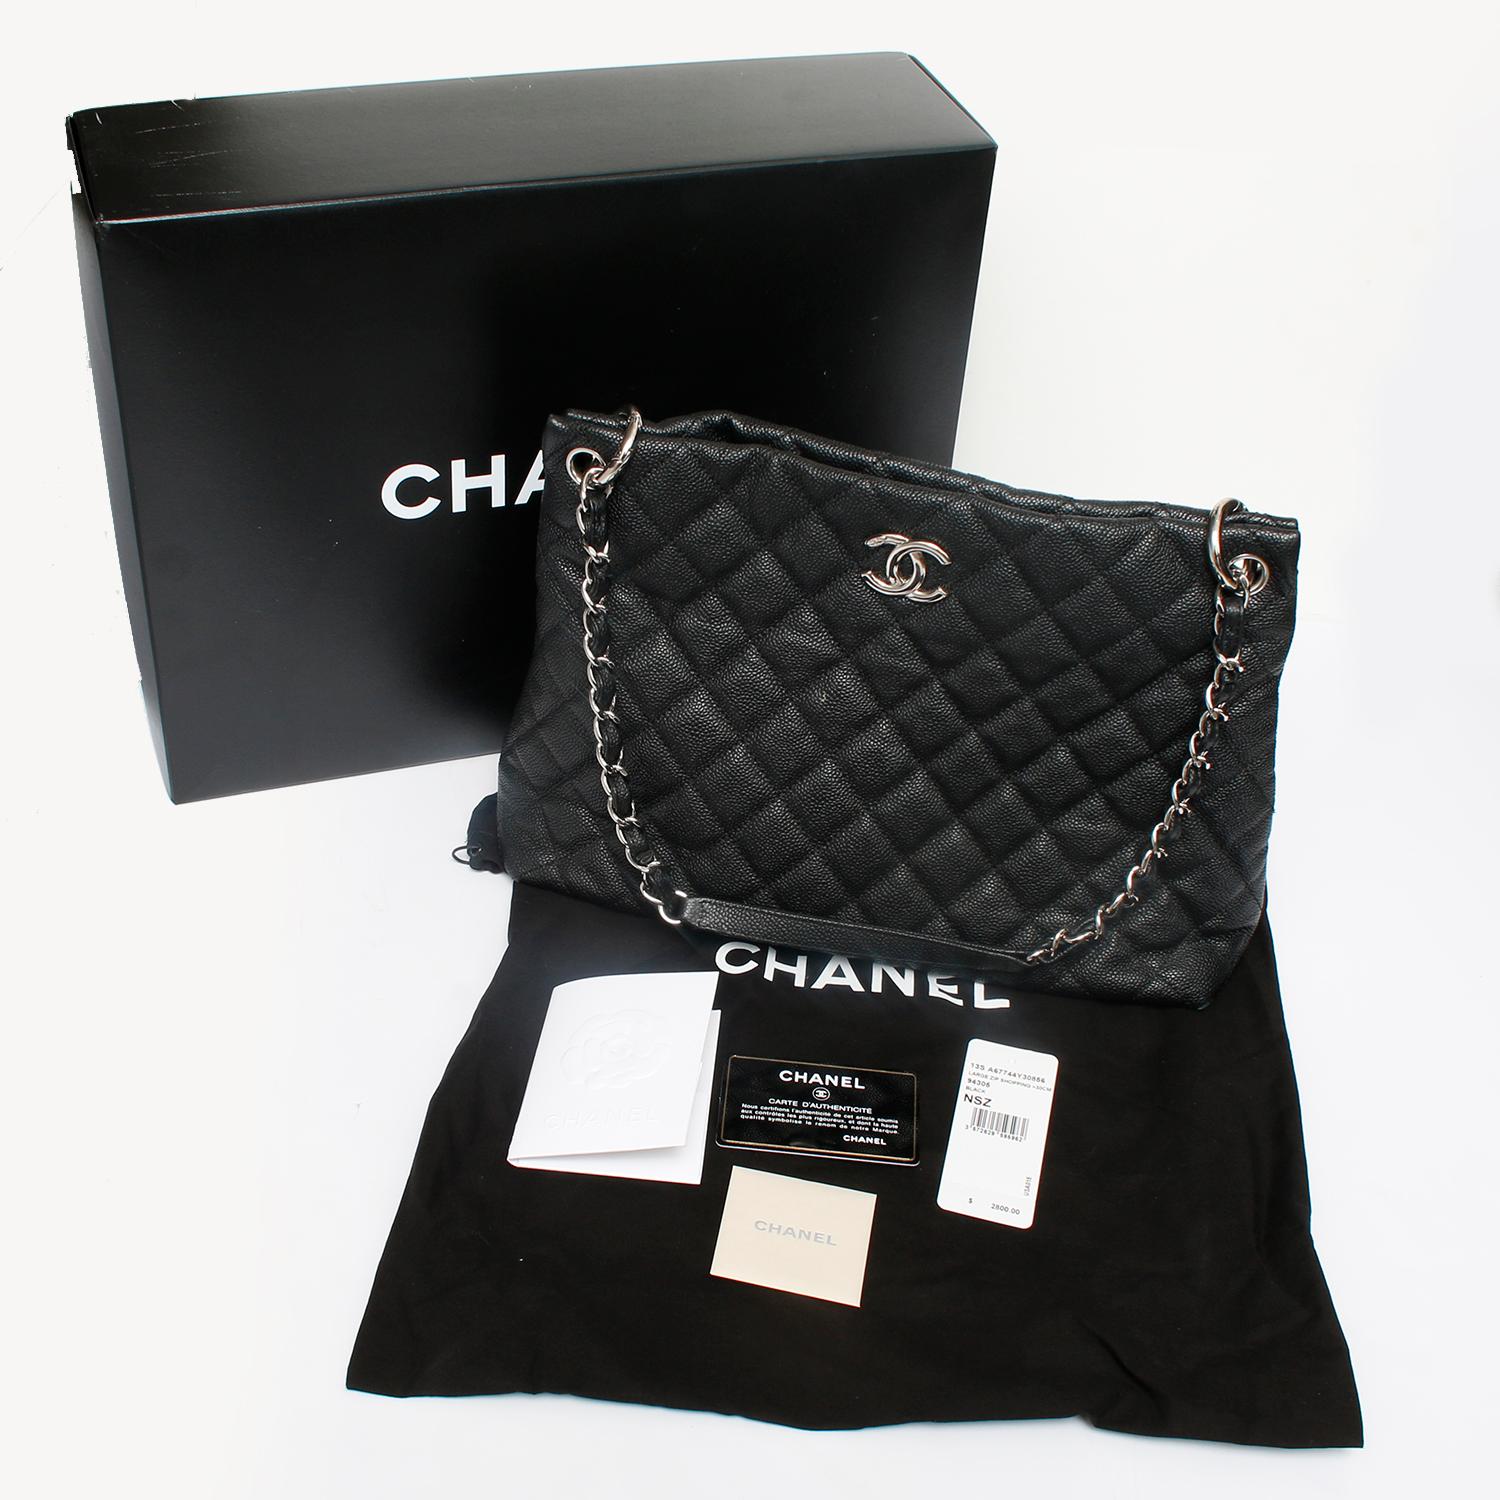 Chanel Single Strap Limited Edition Easy Caviar Grand Shop Zip Bag  - Single strap 2013 Limited edition. Black quilted bag. Two inside pockets and one side zip. This bag has been carried a total of 3-4 times. In excellent condition. Includes